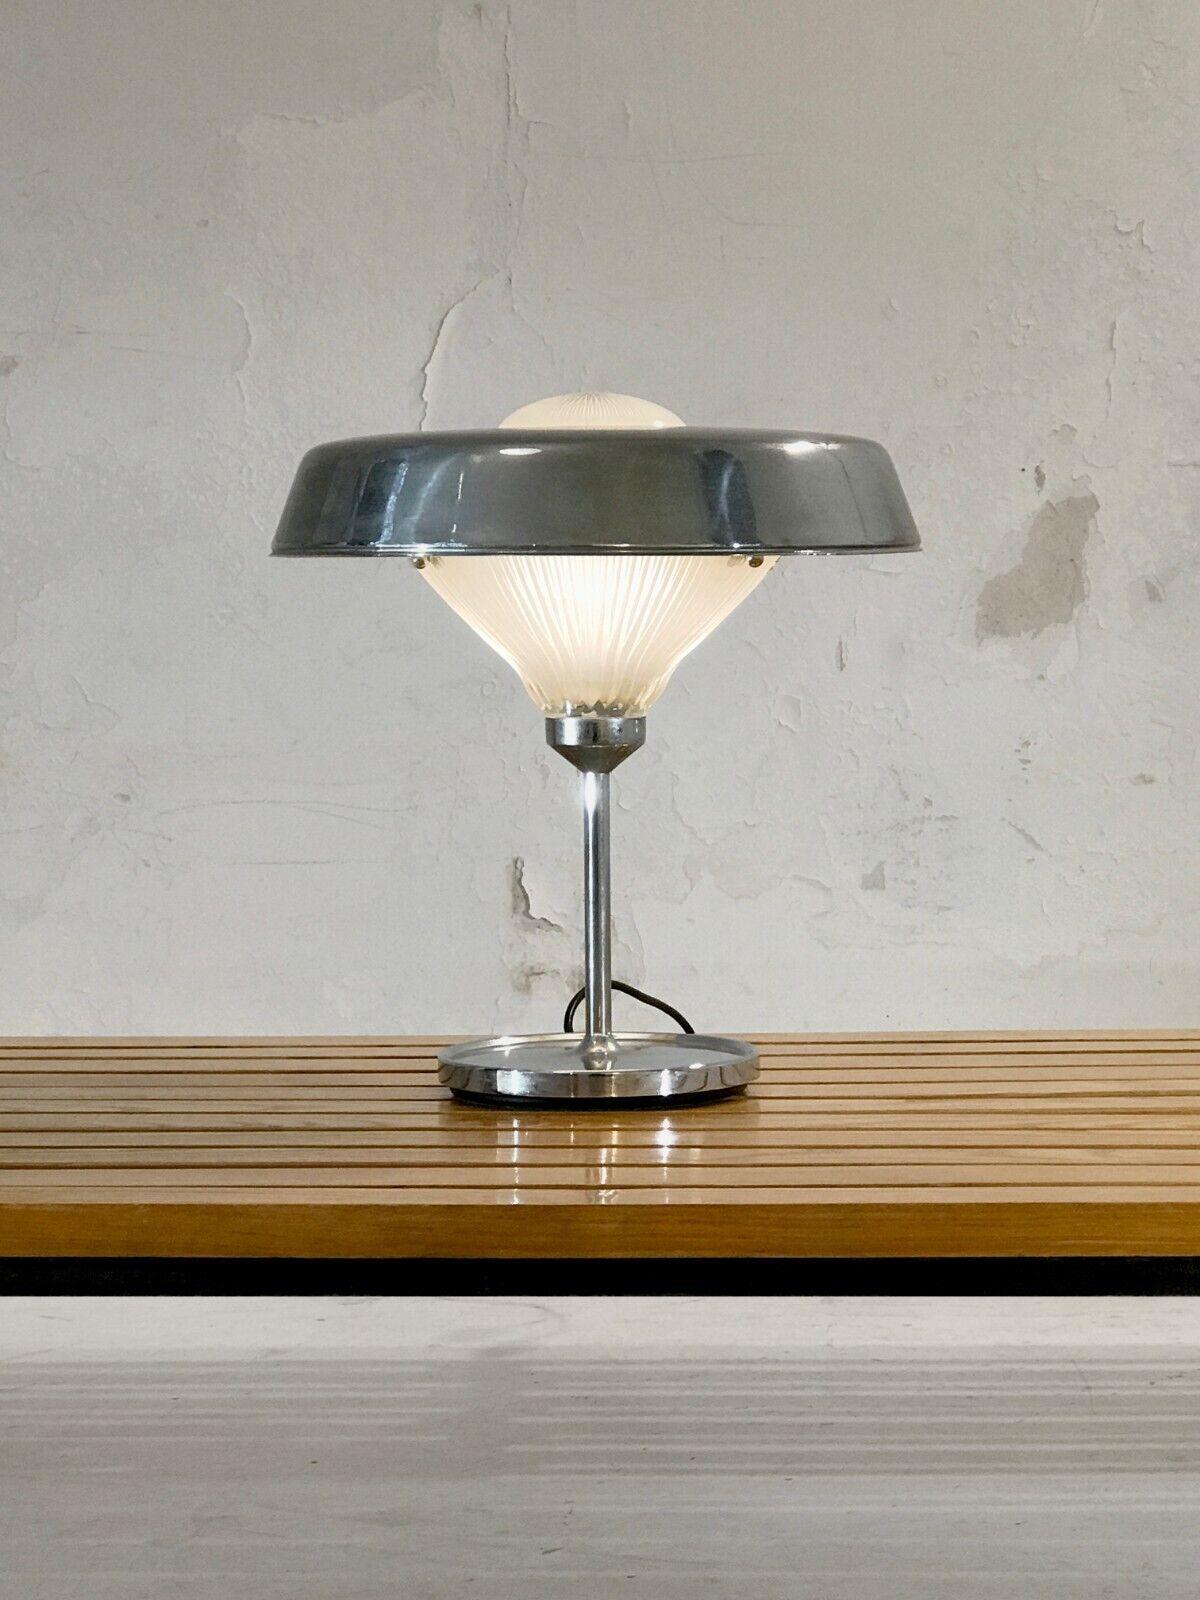 An iconic table lamp, Minimalist, Modernist, Space-Age, structure in chrome-plated metal, thick glass with geometric reliefs, encircled with an aerial lampshade Saturn-ring-like, by BBPR, original edition Artemide, Italy 1970.

A second same model